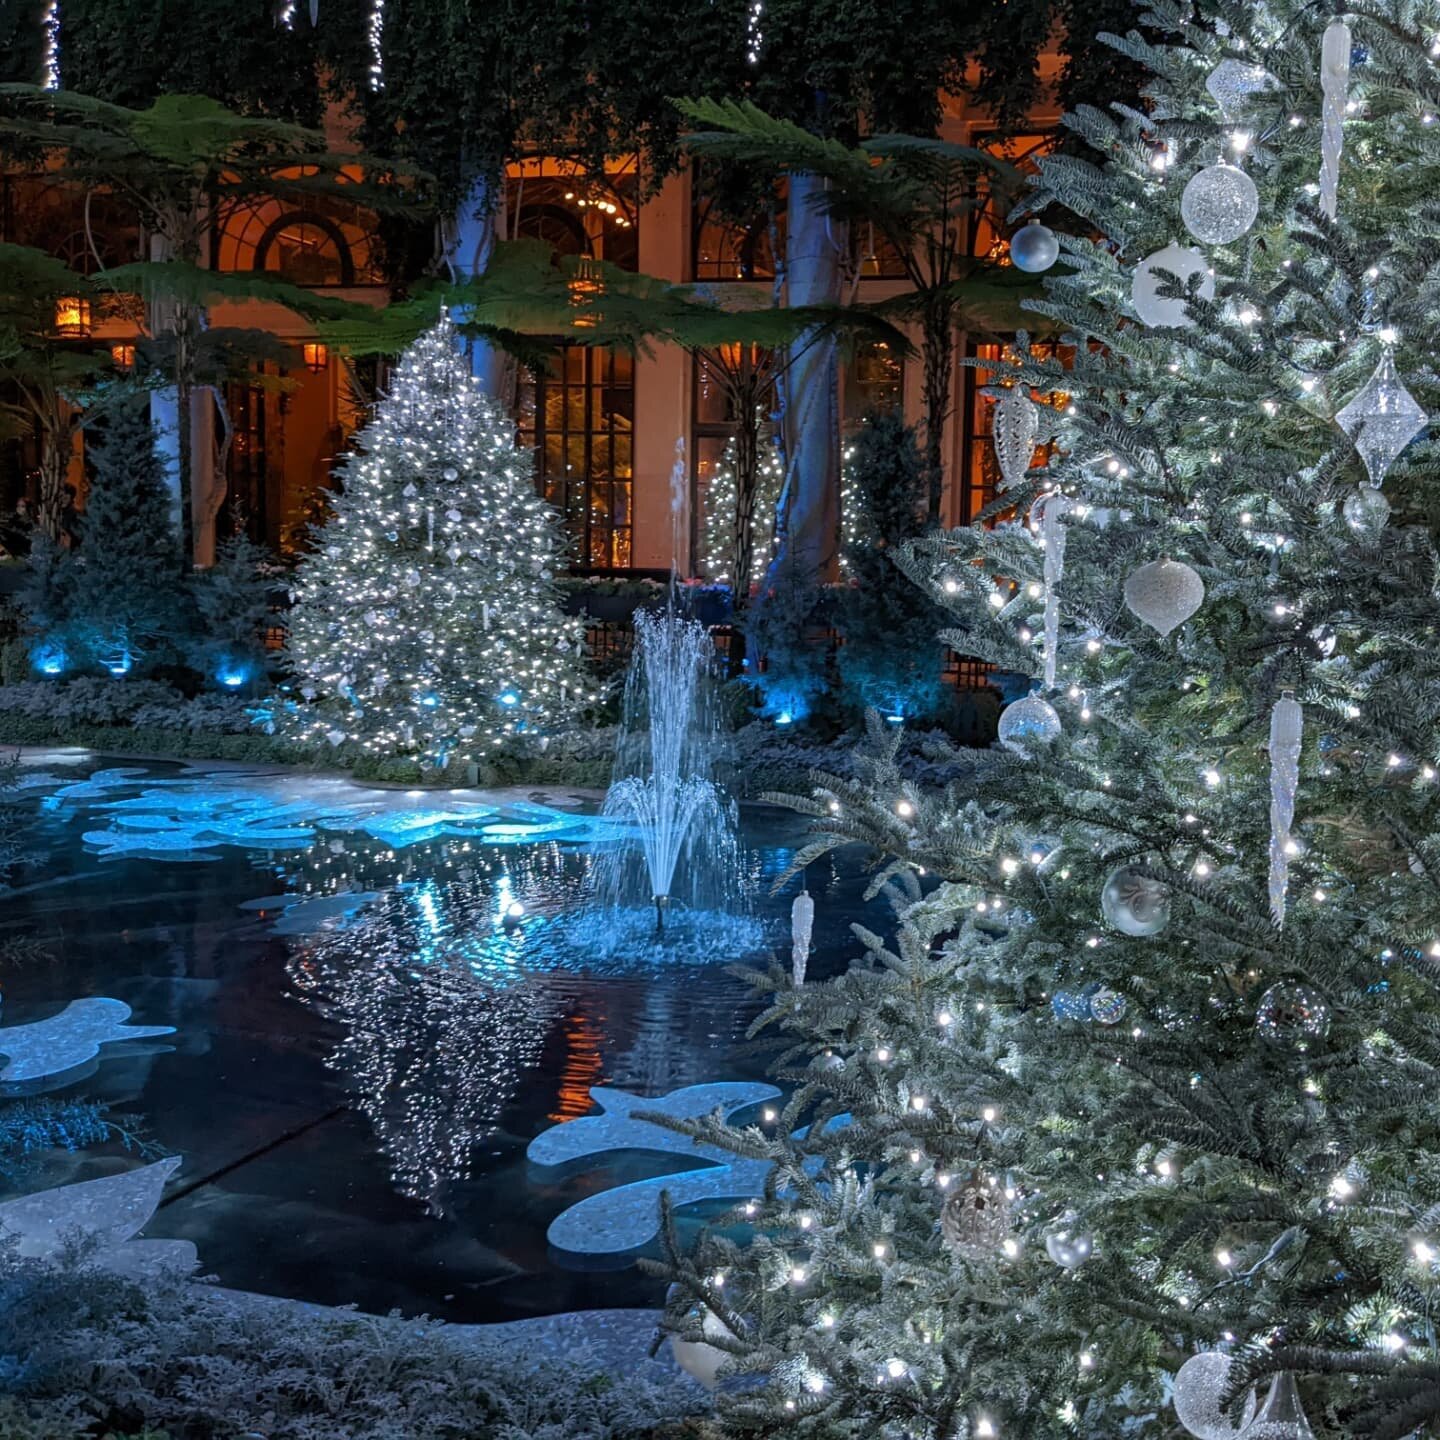 Another lovely Longwood Christmas-a beautiful showcase of fire and ice!